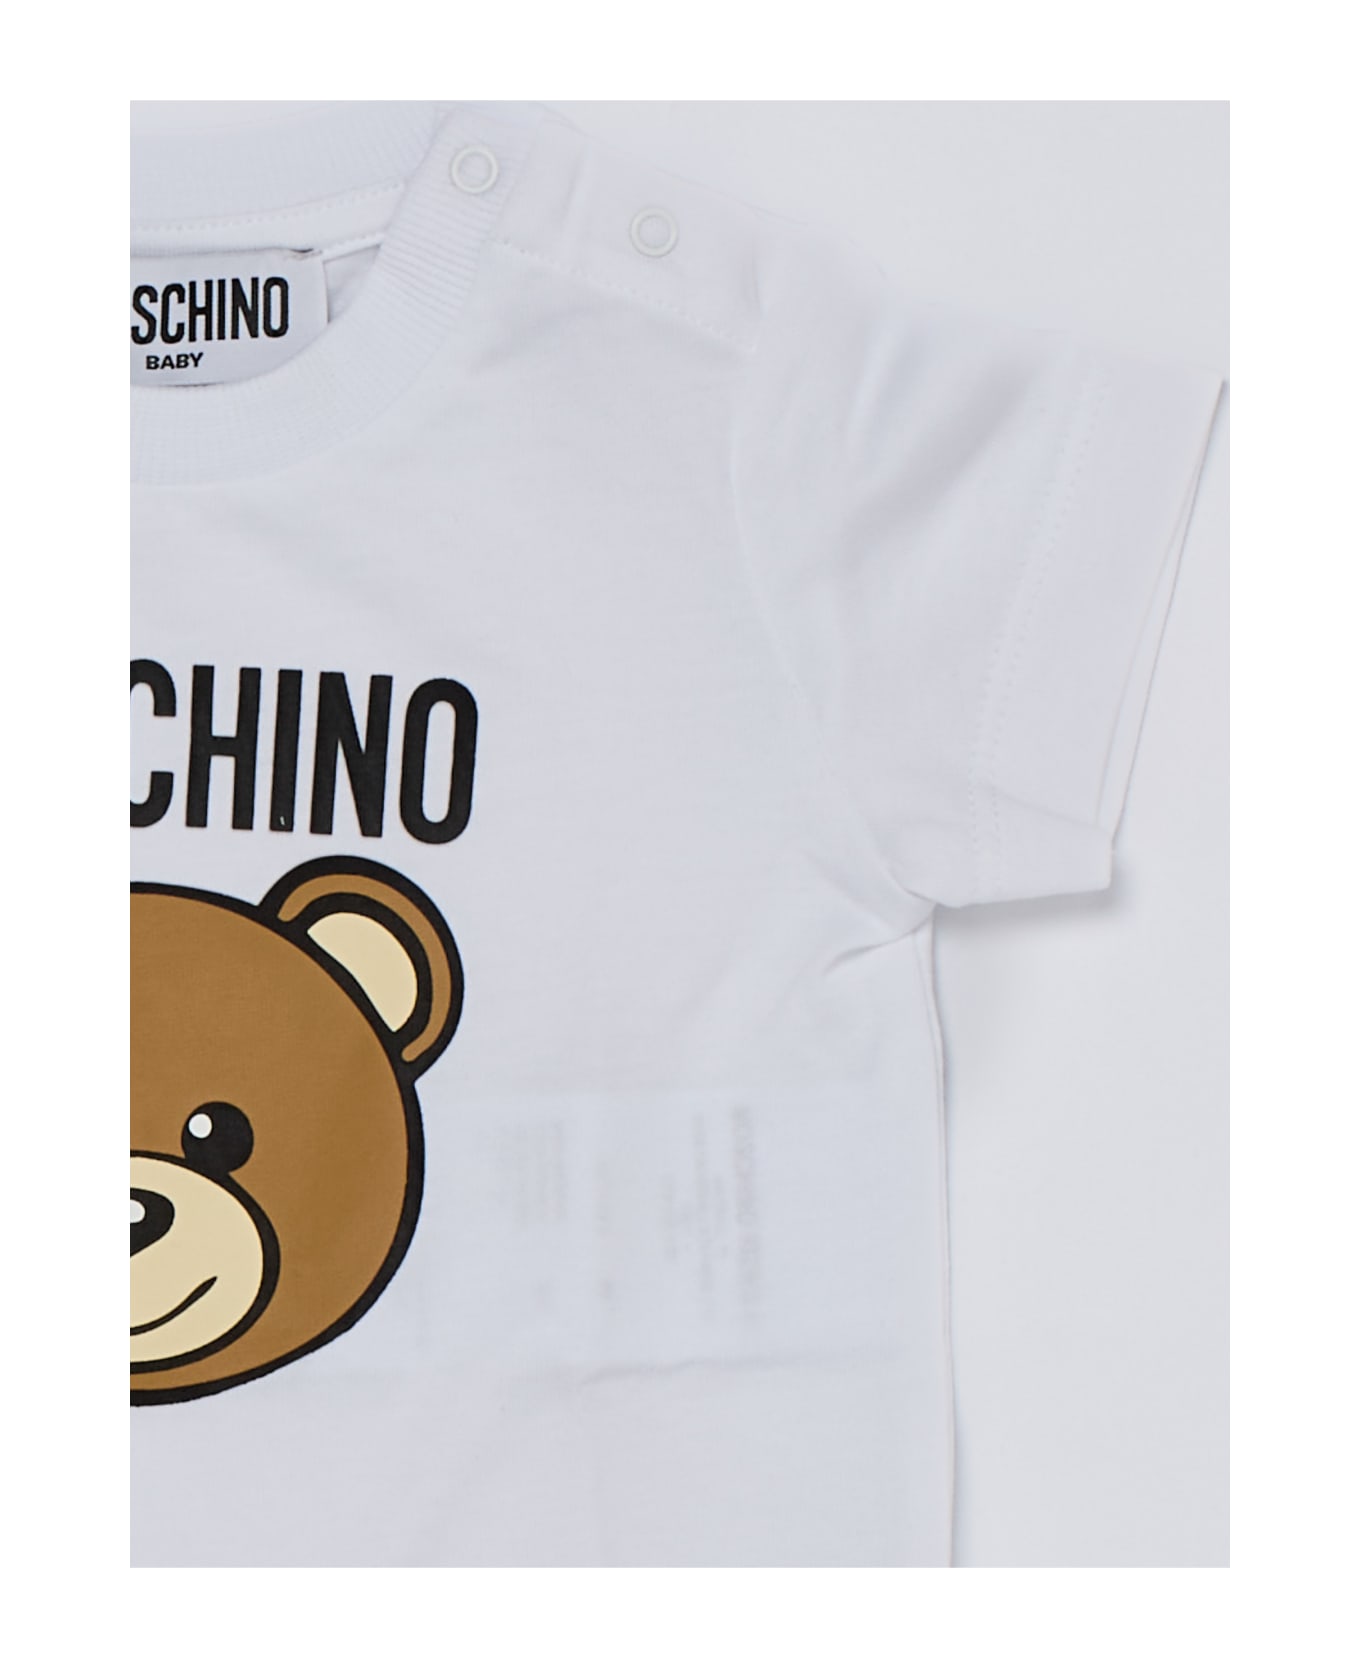 Moschino T-shirt+shorts Suit - BIANCO-ROSSO